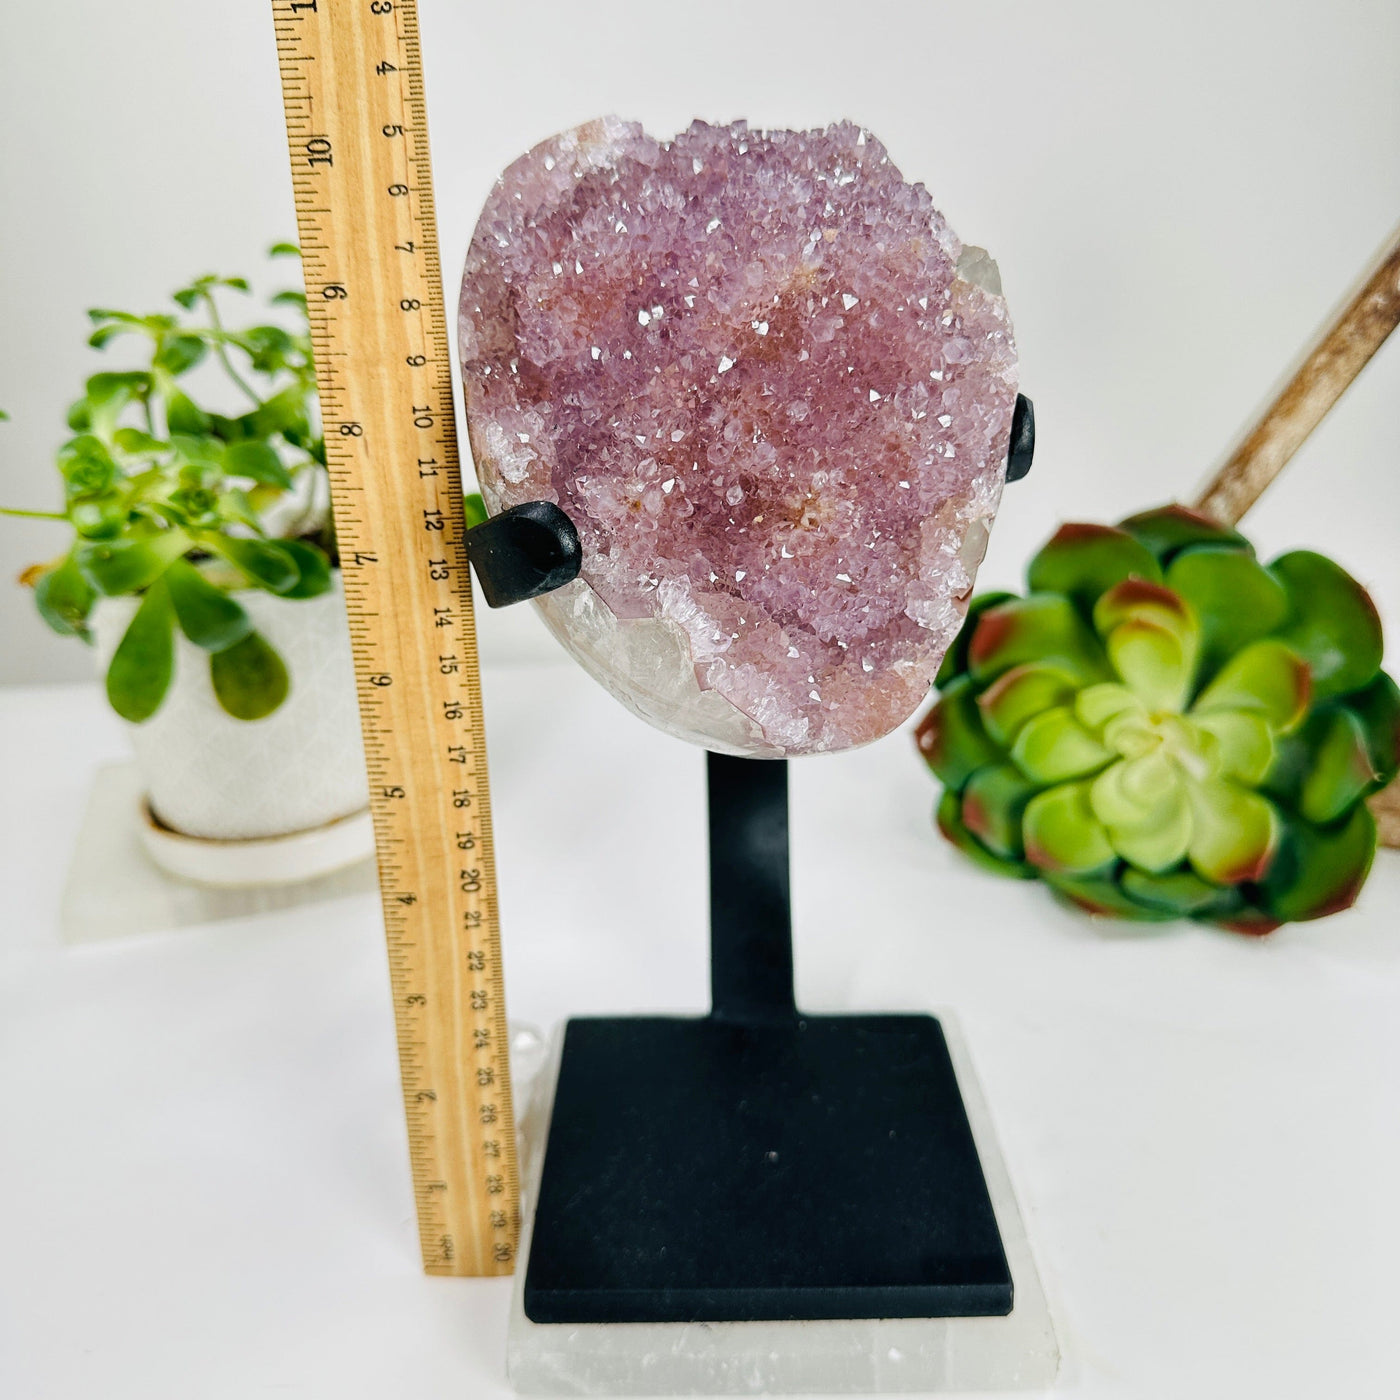 polished amethyst with stand next to a ruler for size reference